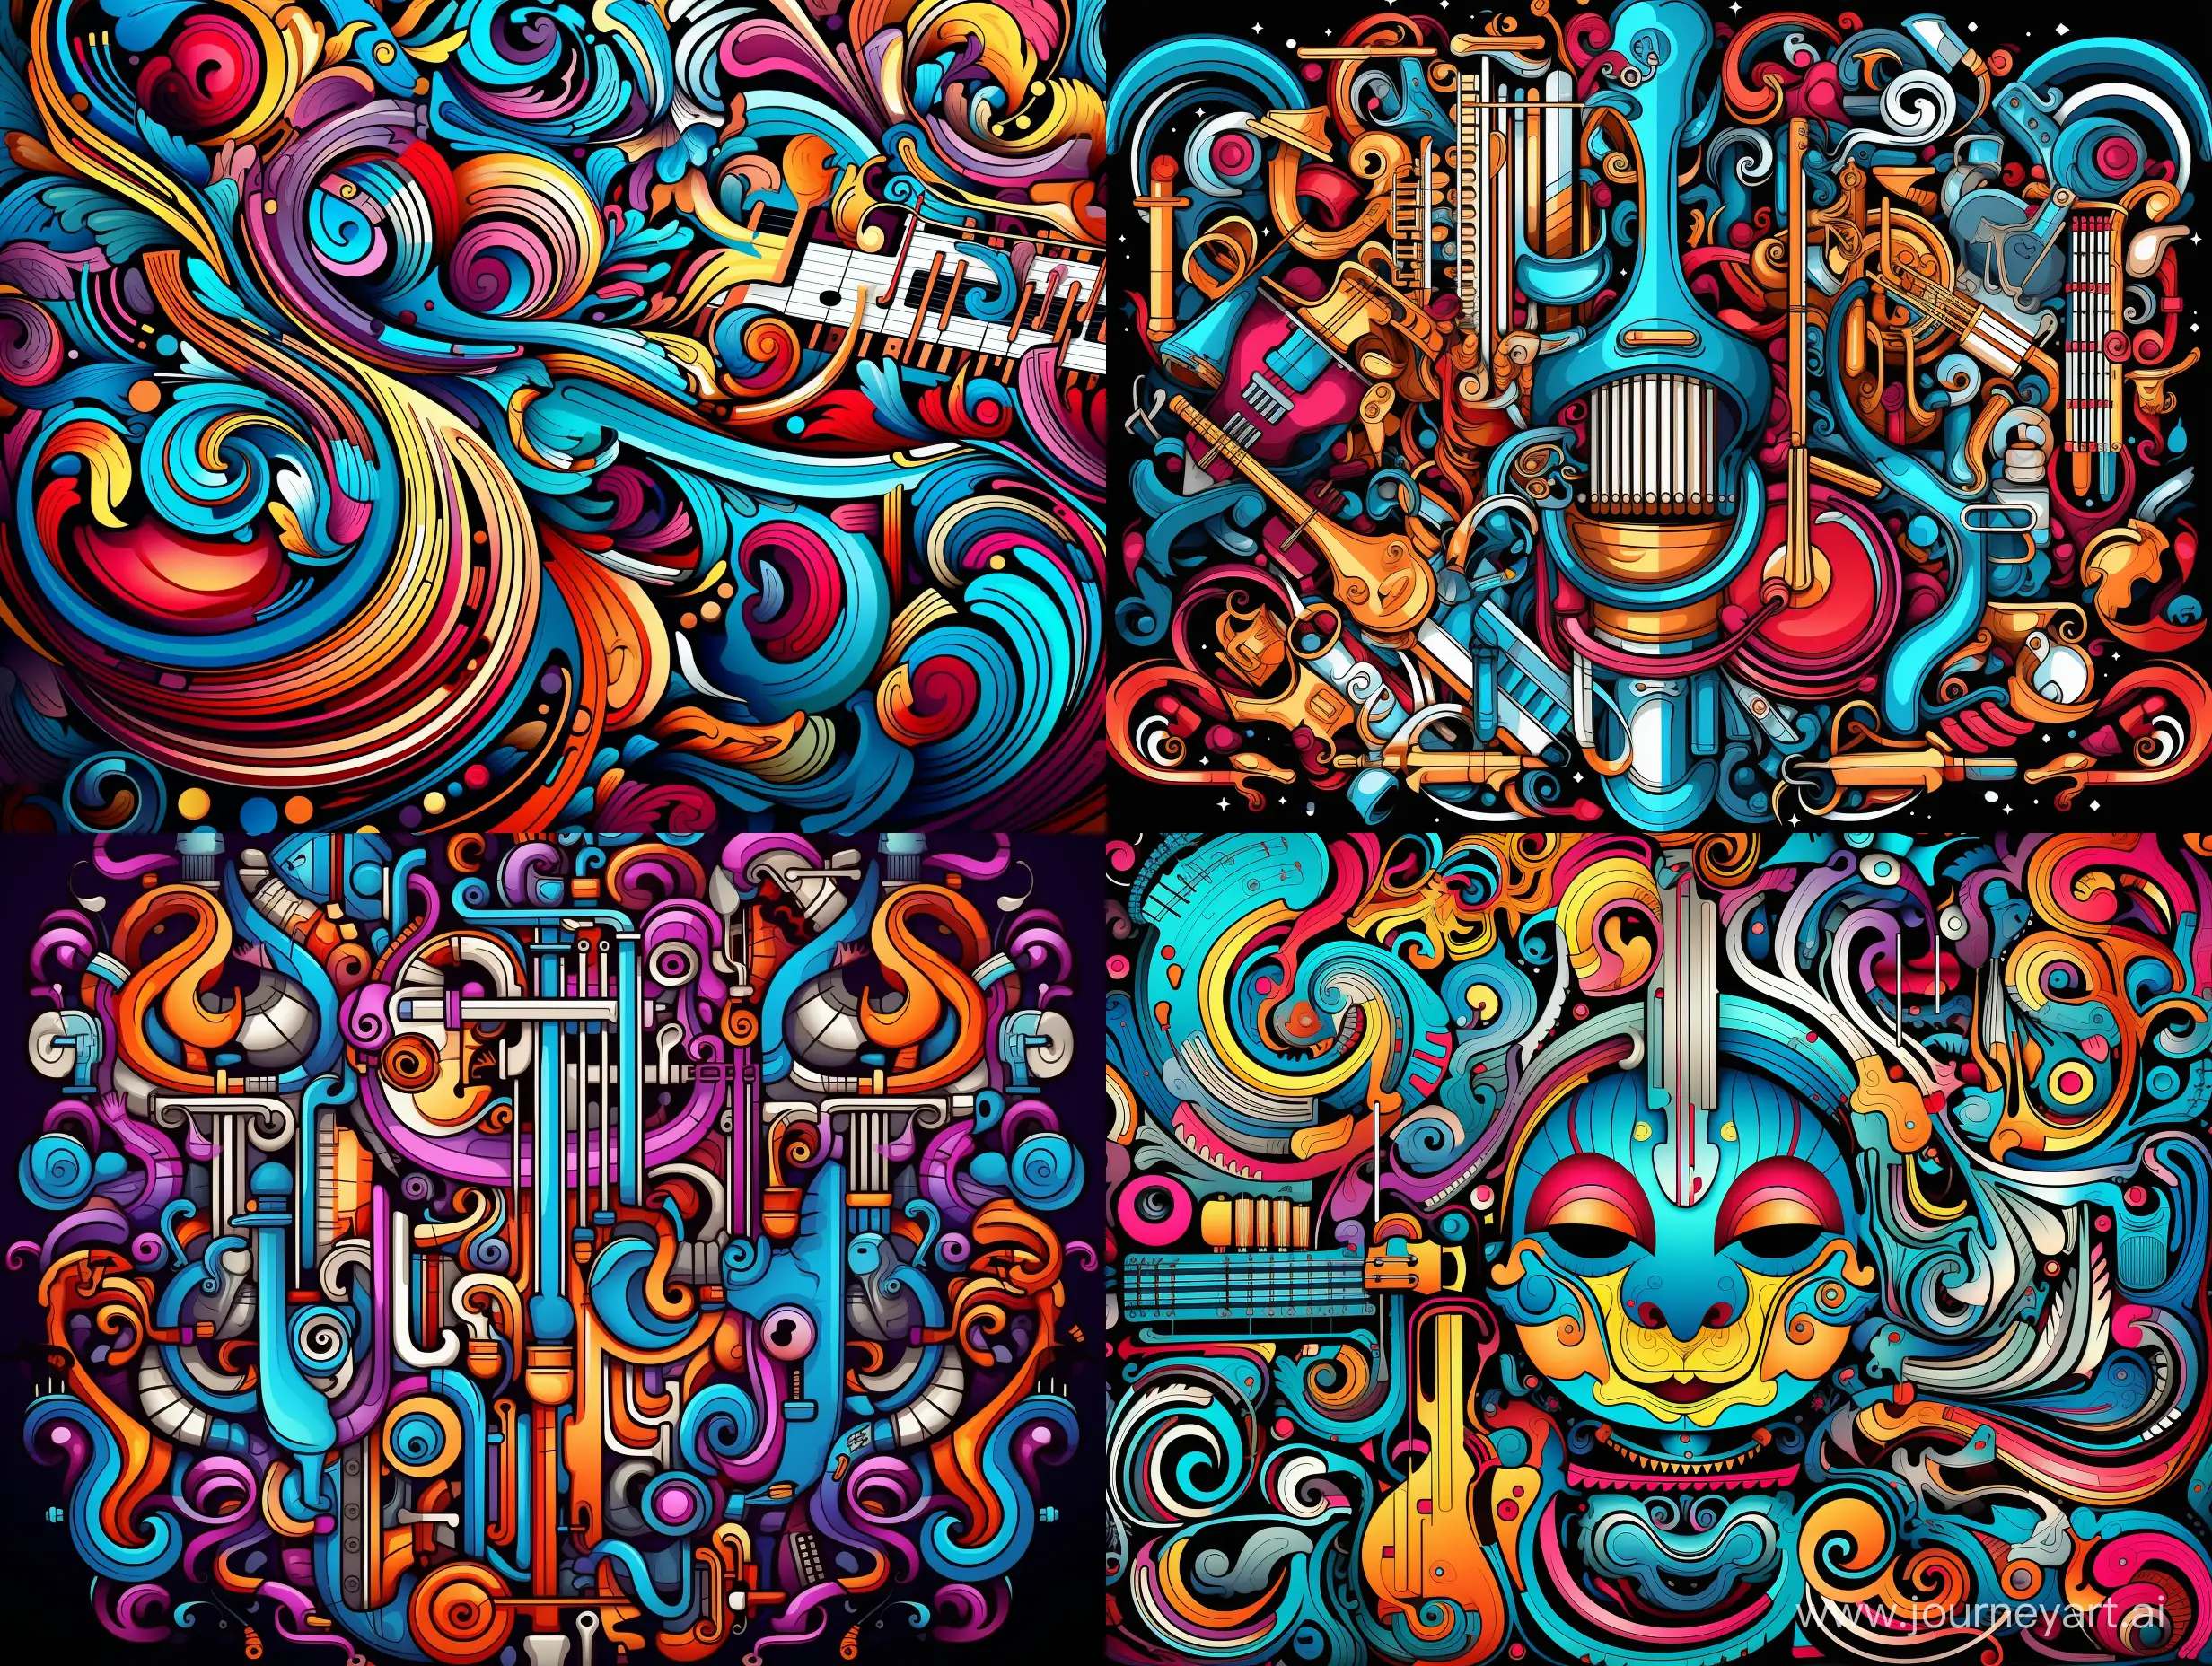 ornamental pattern with musical key, notes, reflect vertically, horizontally, many details, complex colors, caricature, pop art style